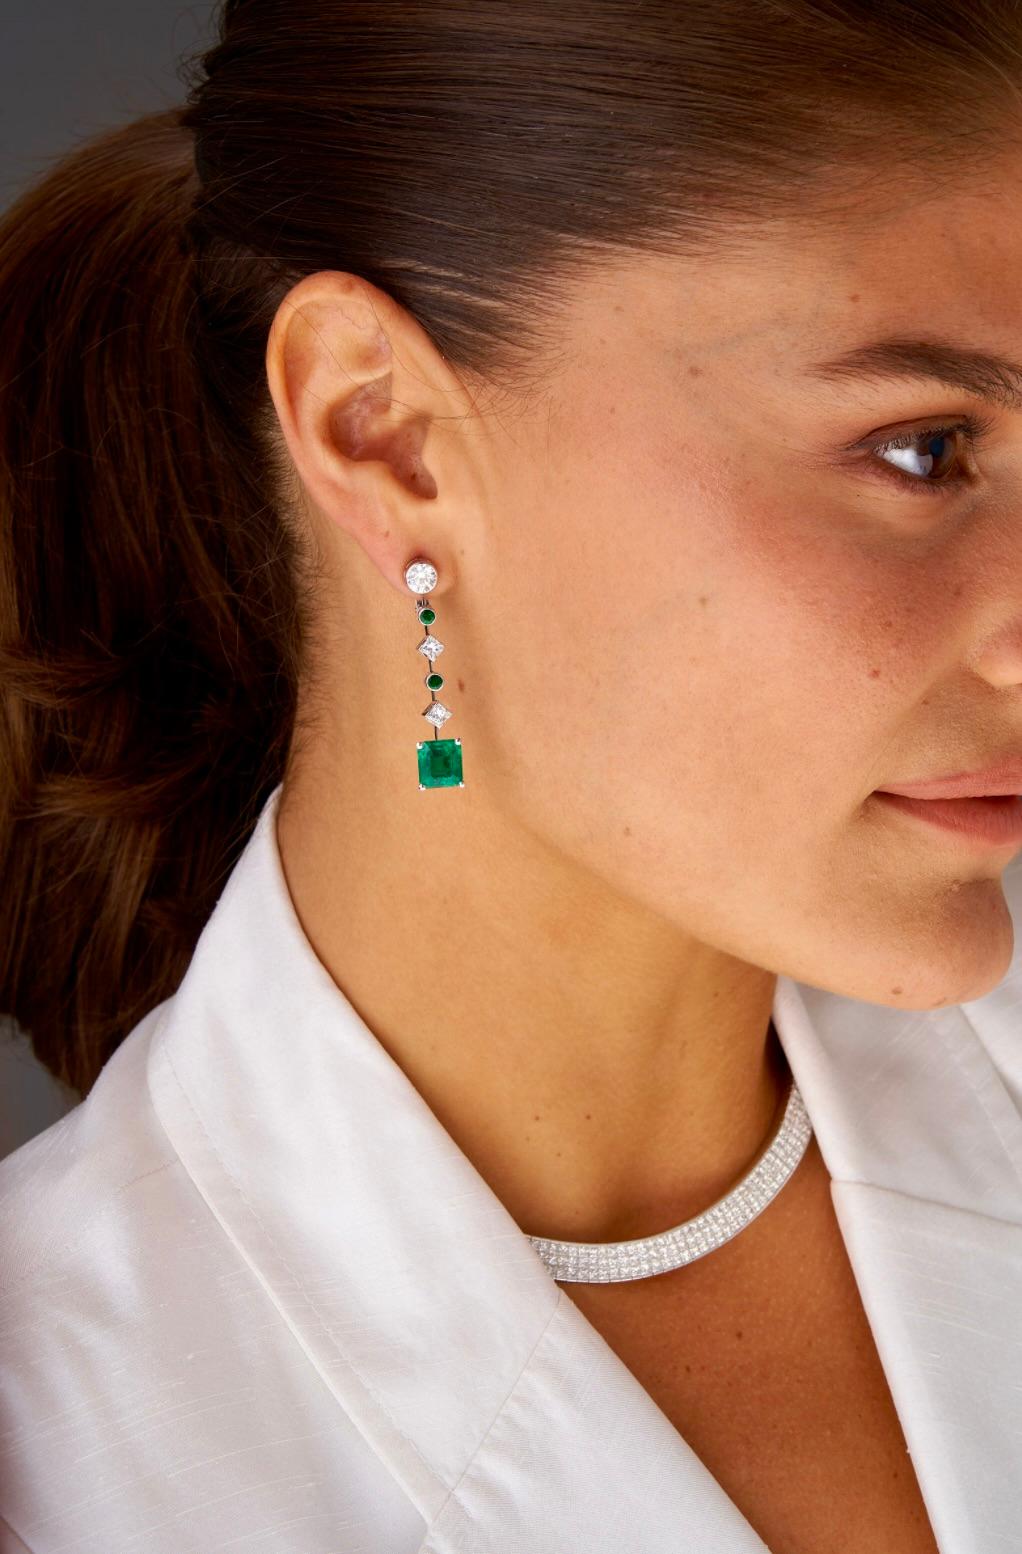 Contemporary Chaumet SSEF Certified Colombian Emerald Diamond Earrings For Sale